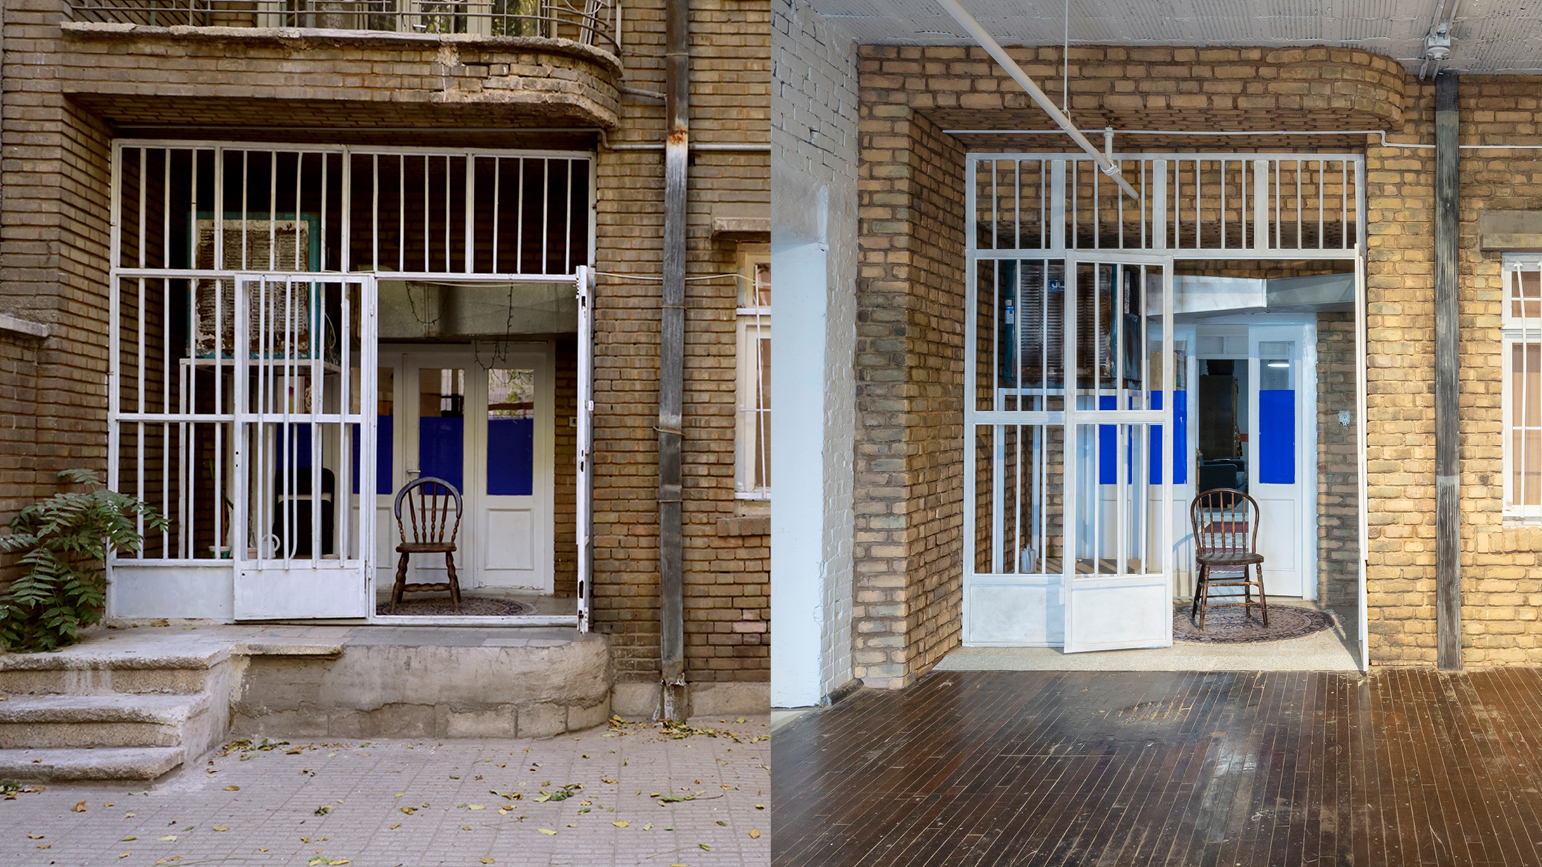 Two nearly identical images of an exterior of an apartment facade. The facade on the right is a replica created inside a museum of the facade on the left.